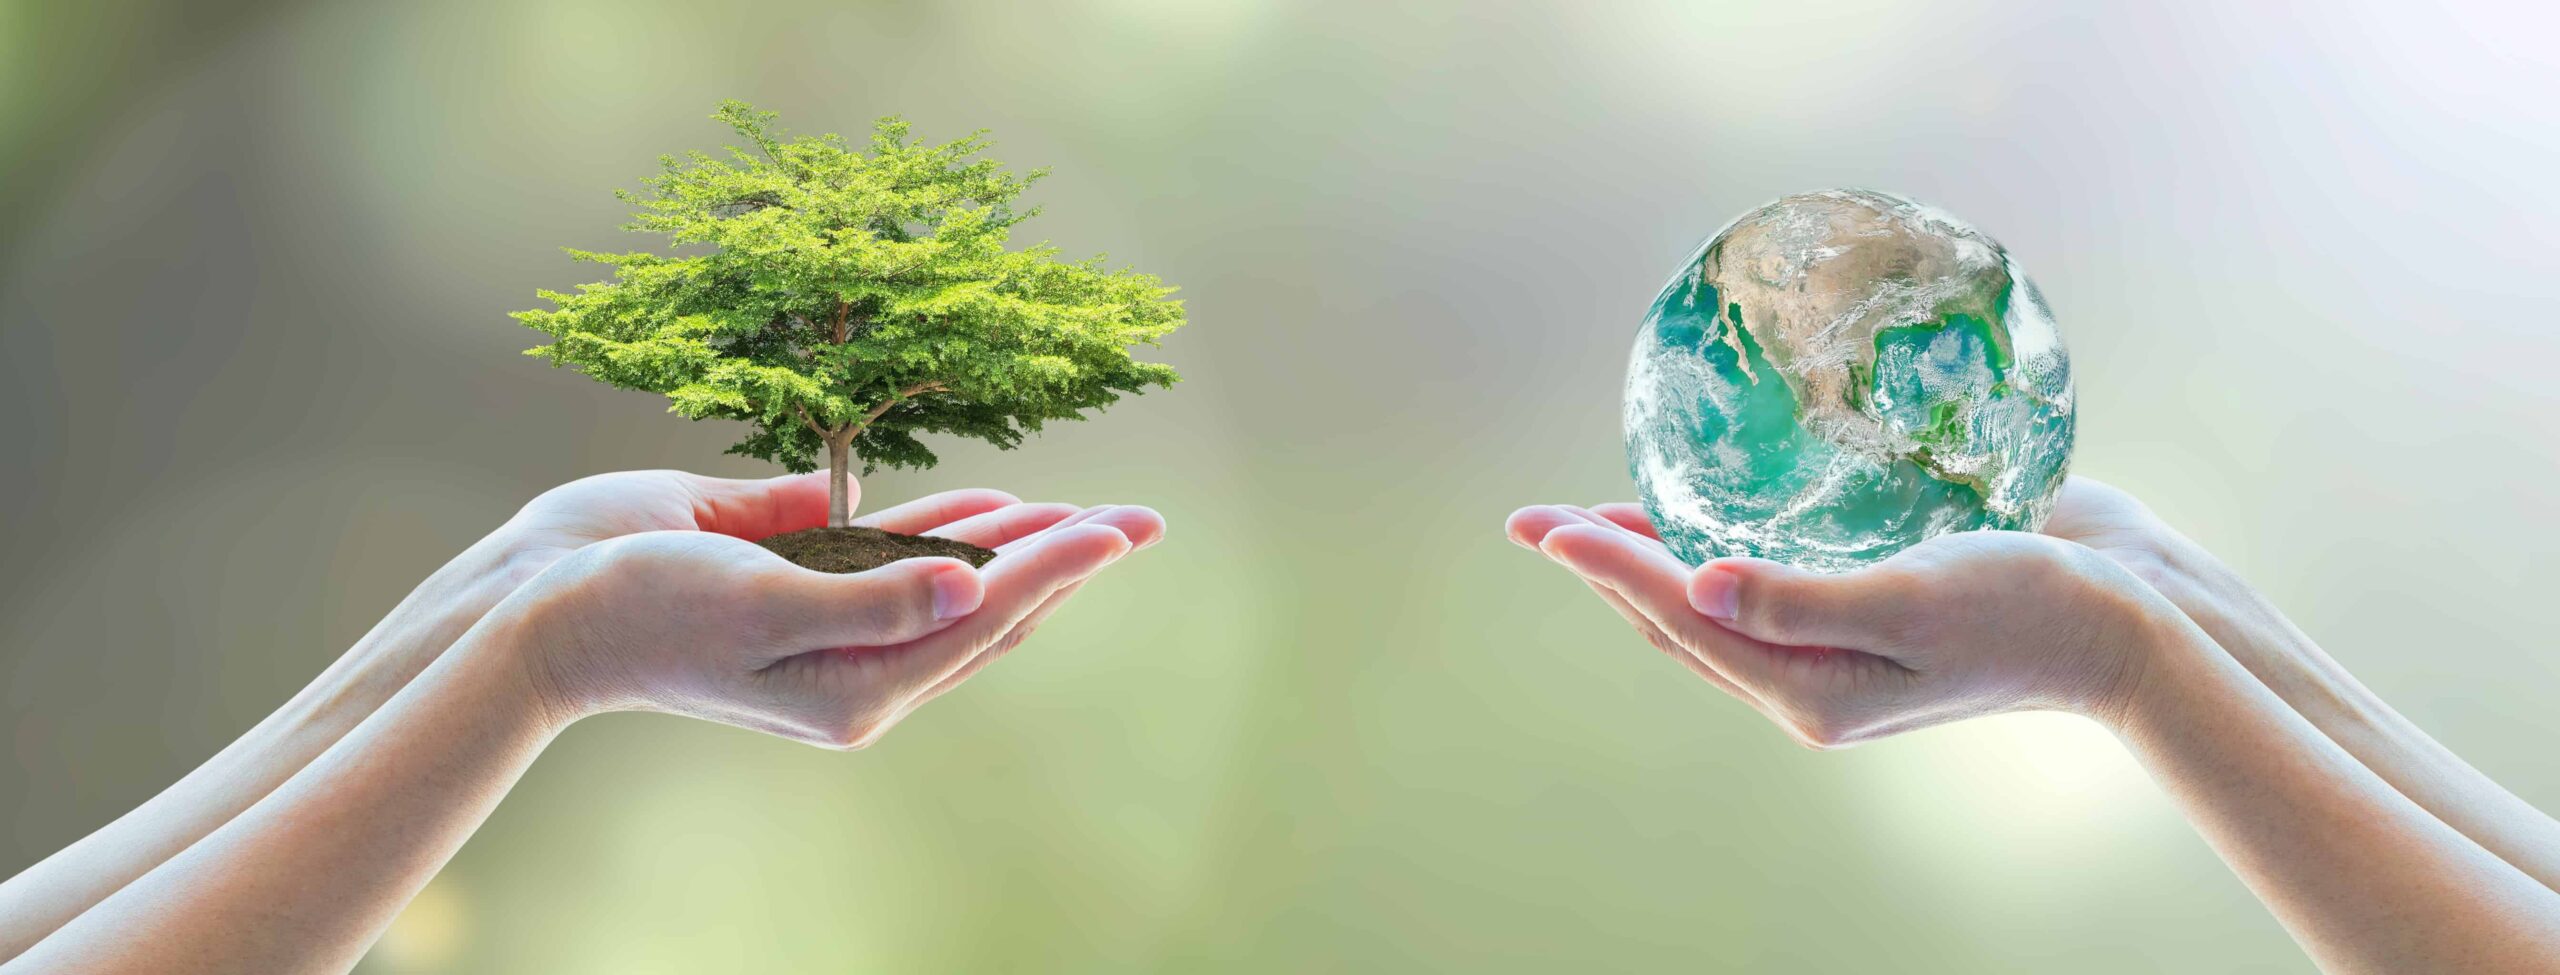 Two people hands holding growing big tree on soil eco bio globe in clean CSR ESG natural sunlight background World environment day go green concept Element of the image furnished by NASA